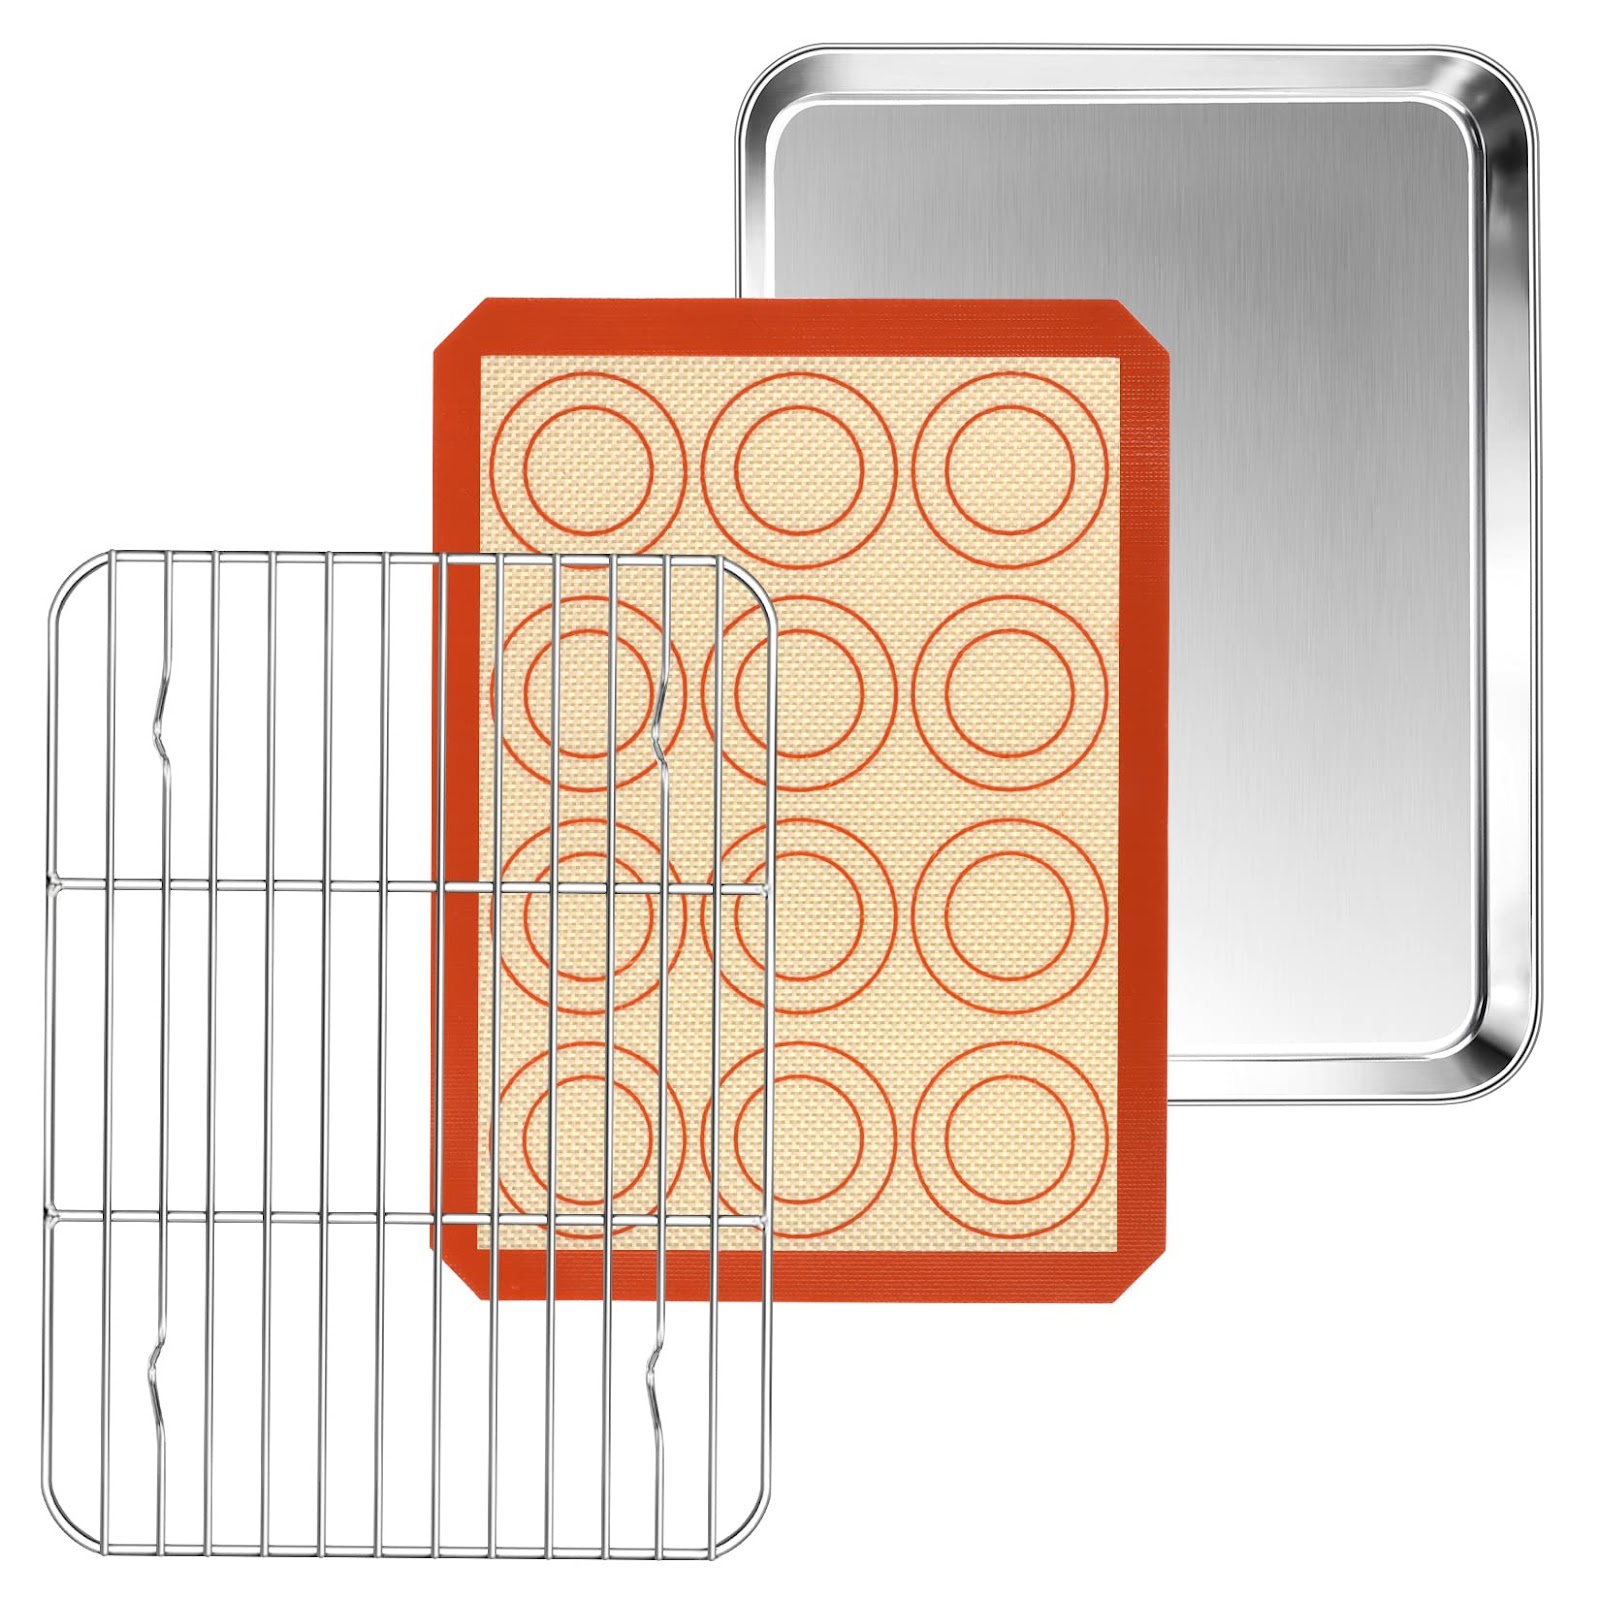 P&P CHEF Small Toaster Oven Pan Set